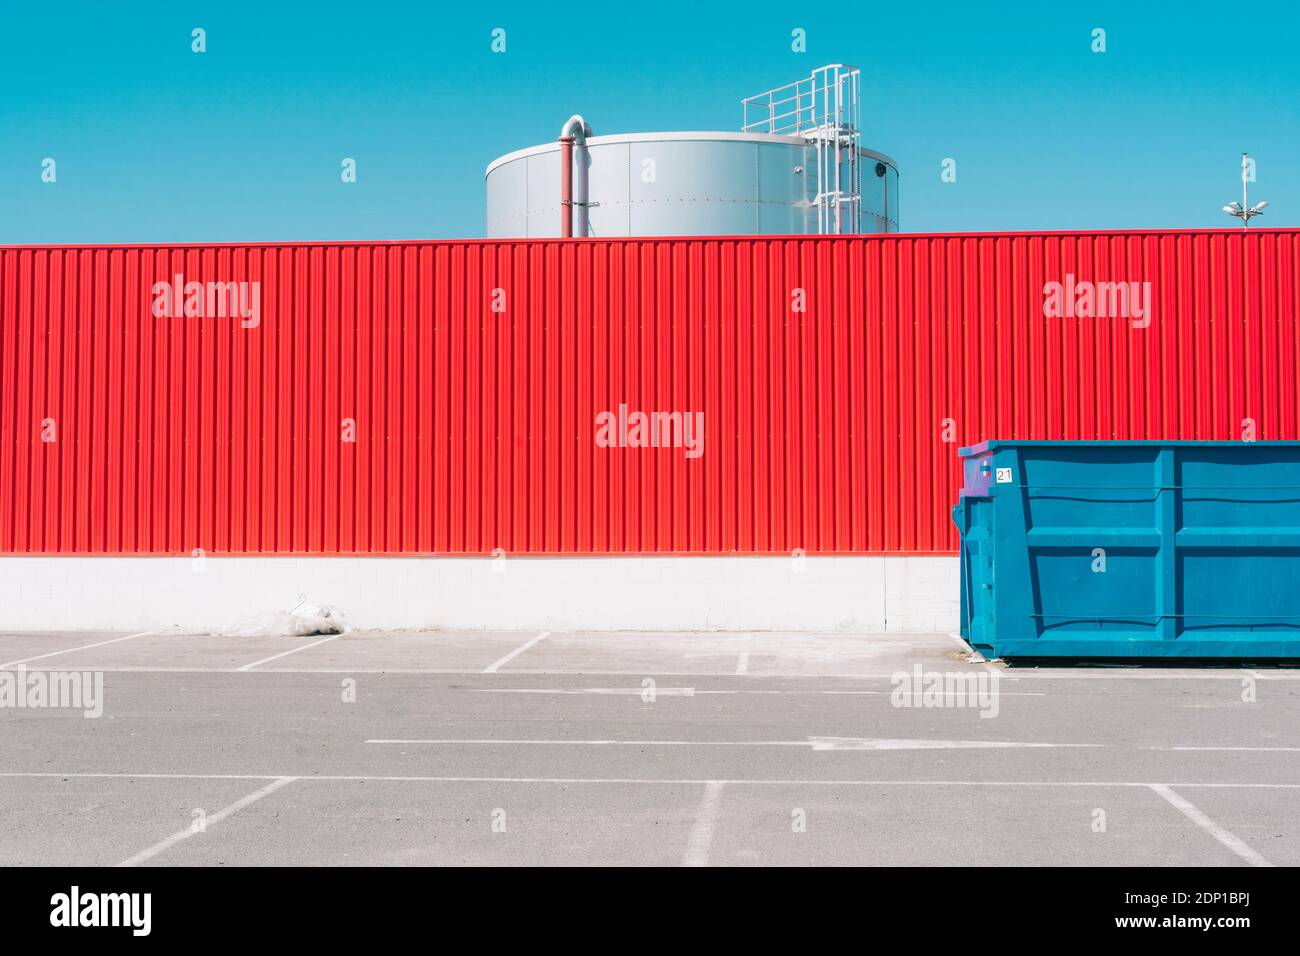 Blue container in front of red wall in industrial setting Stock Photo